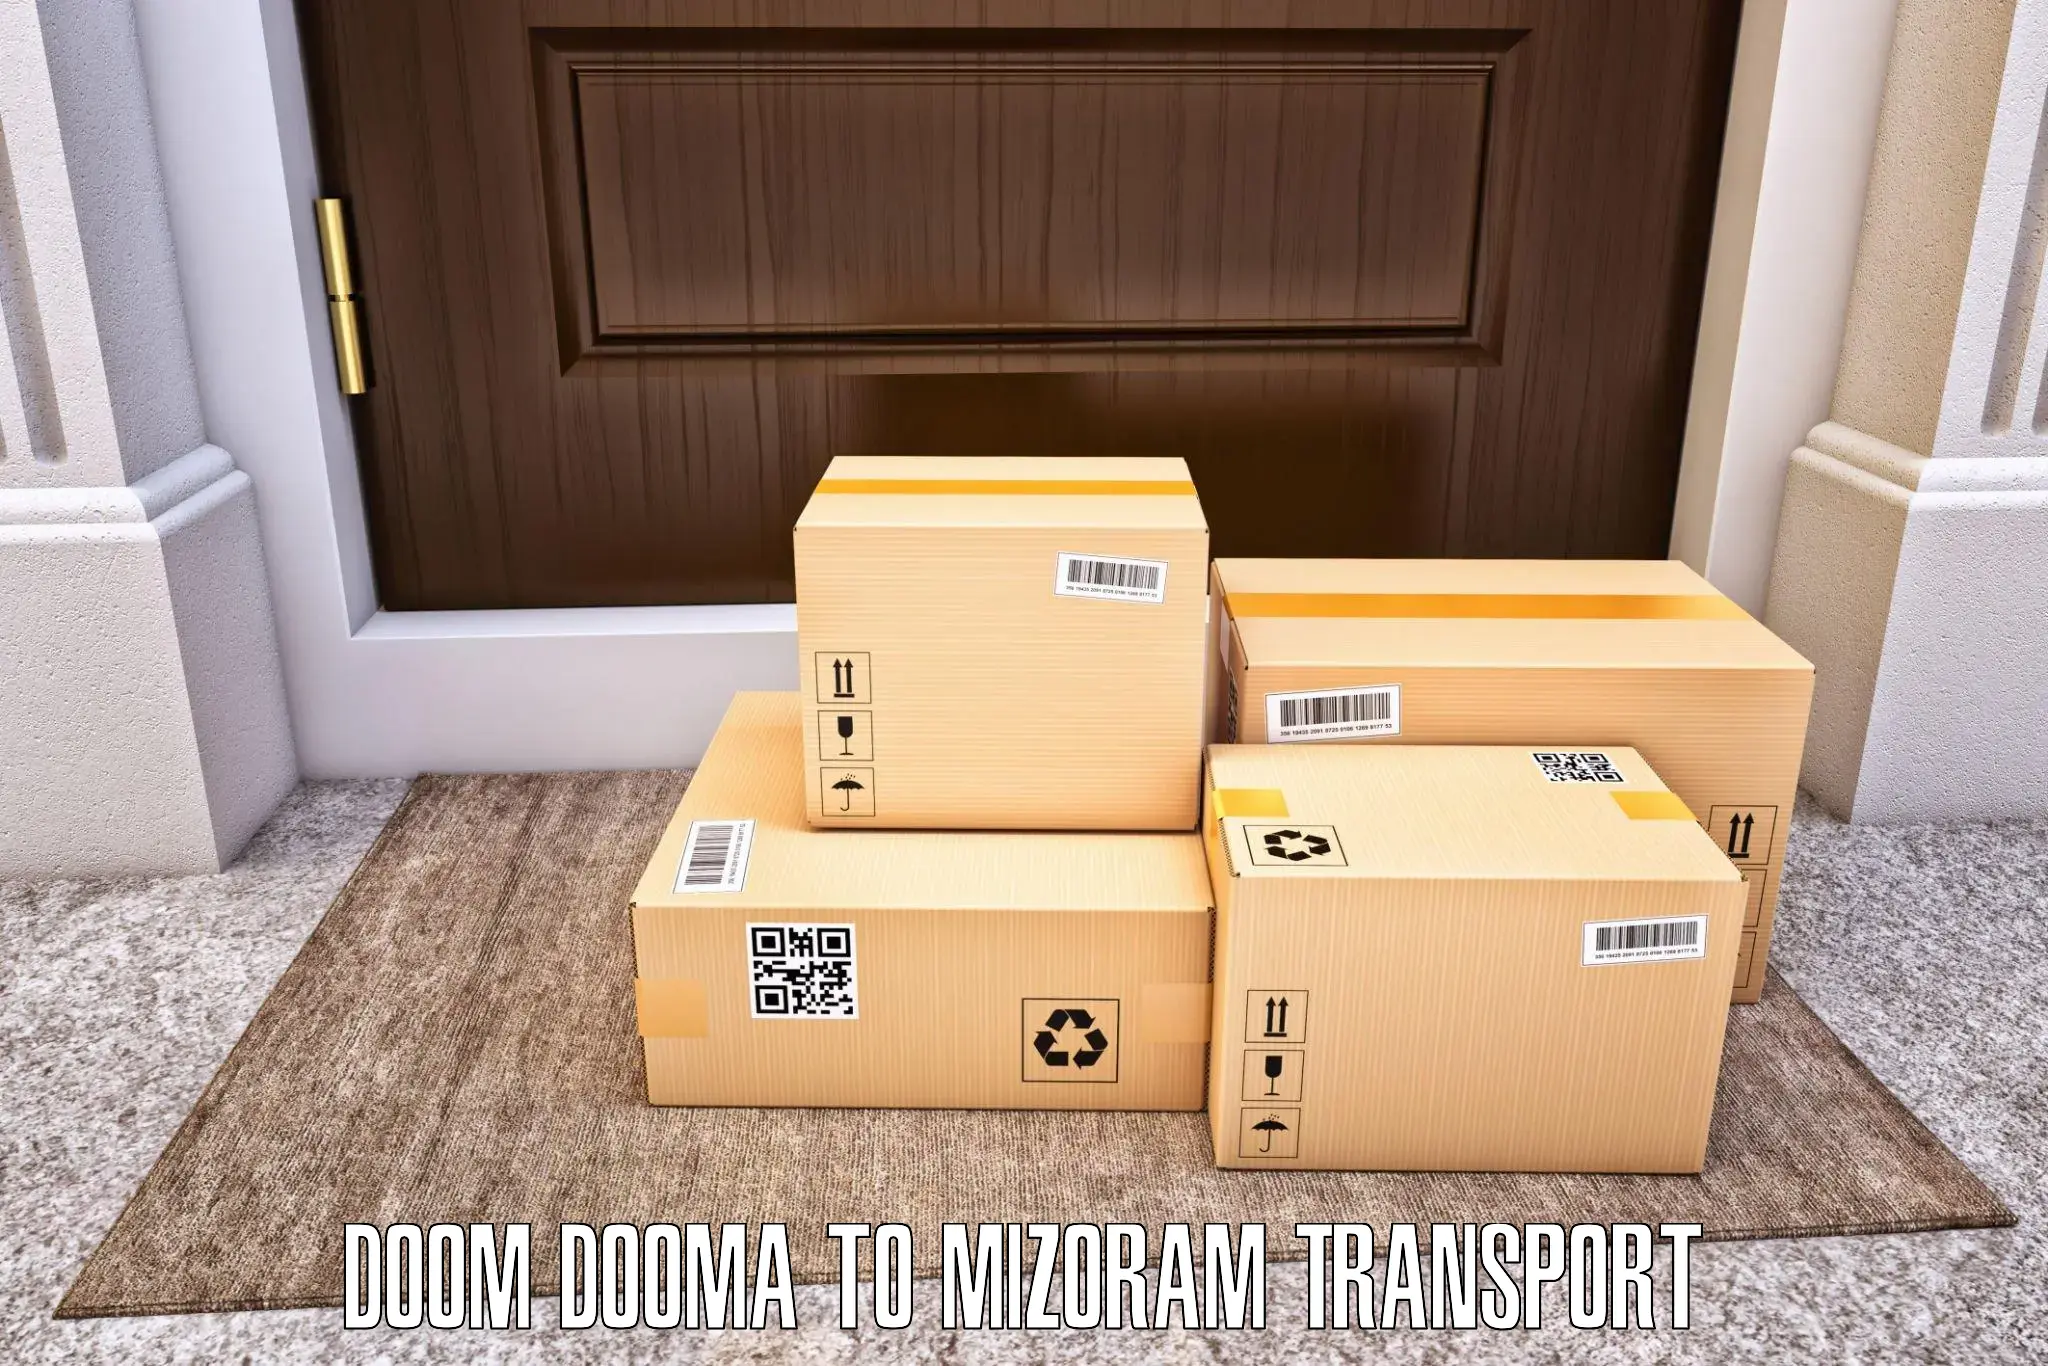 Container transport service Doom Dooma to Tlabung